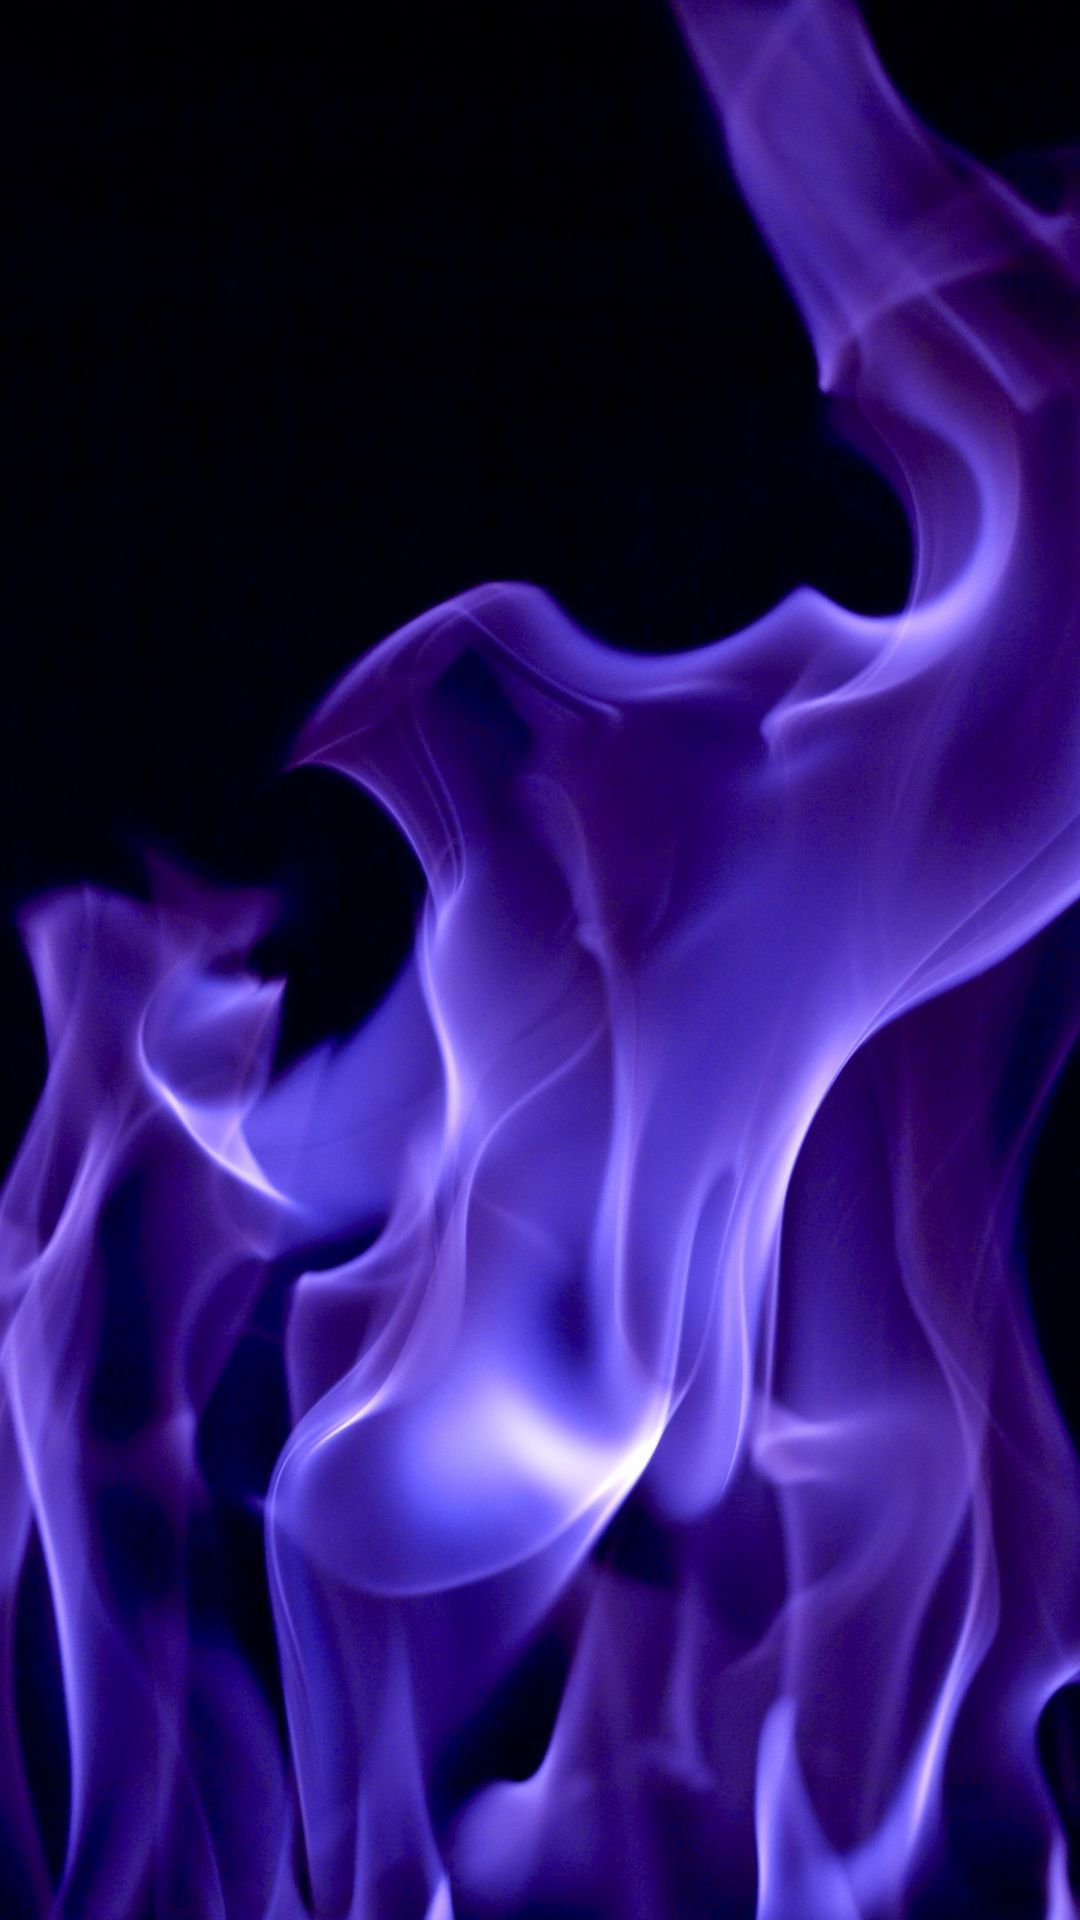 Abstract Fire Wallpaper Android Download. Purple aesthetic, Dark purple wallpaper, Dark purple aesthetic